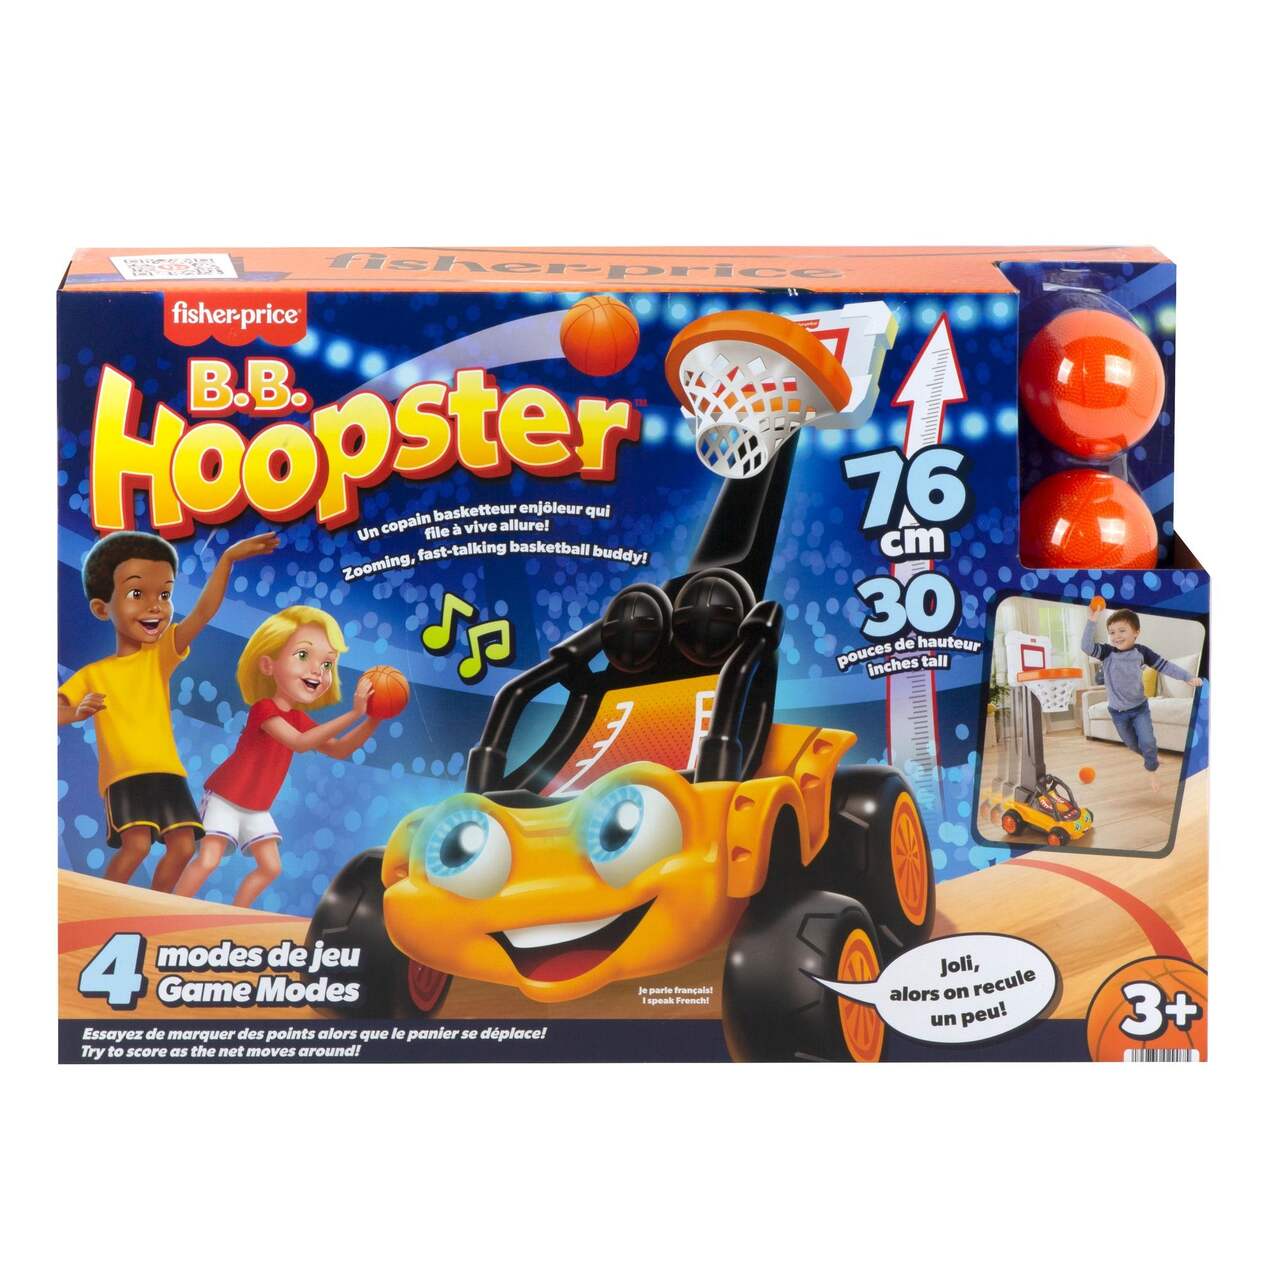 https://media-www.canadiantire.ca/product/seasonal-gardening/toys/preschool-toys-activities/0508252/-fisher-price-hoopster-french-bc58689a-960d-4d64-afce-644038612440-jpgrendition.jpg?imdensity=1&imwidth=640&impolicy=mZoom